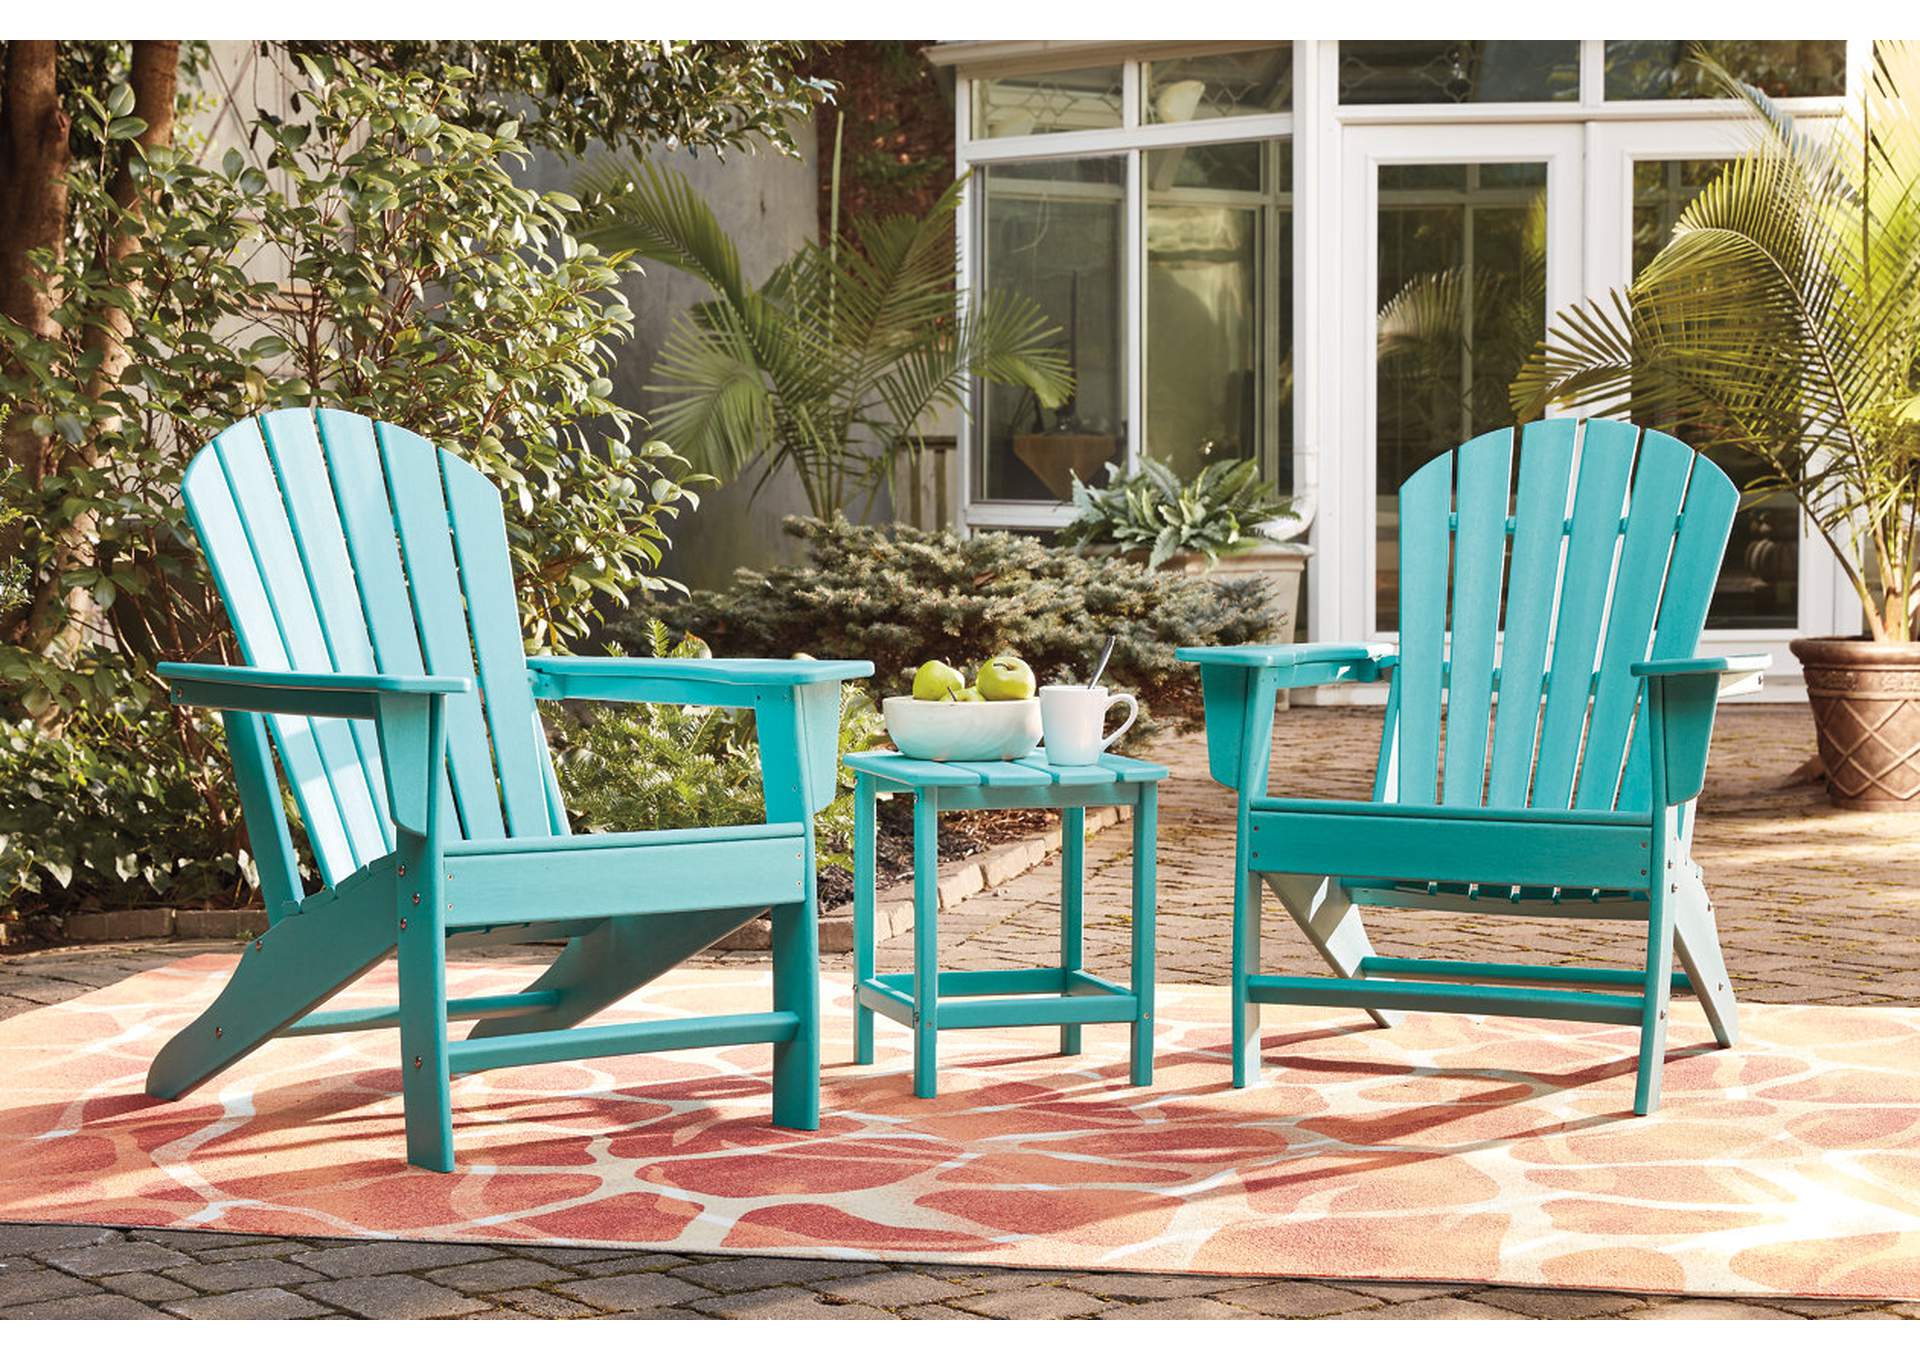 Sundown Treasure 2 Outdoor Chairs with End Table,Outdoor By Ashley